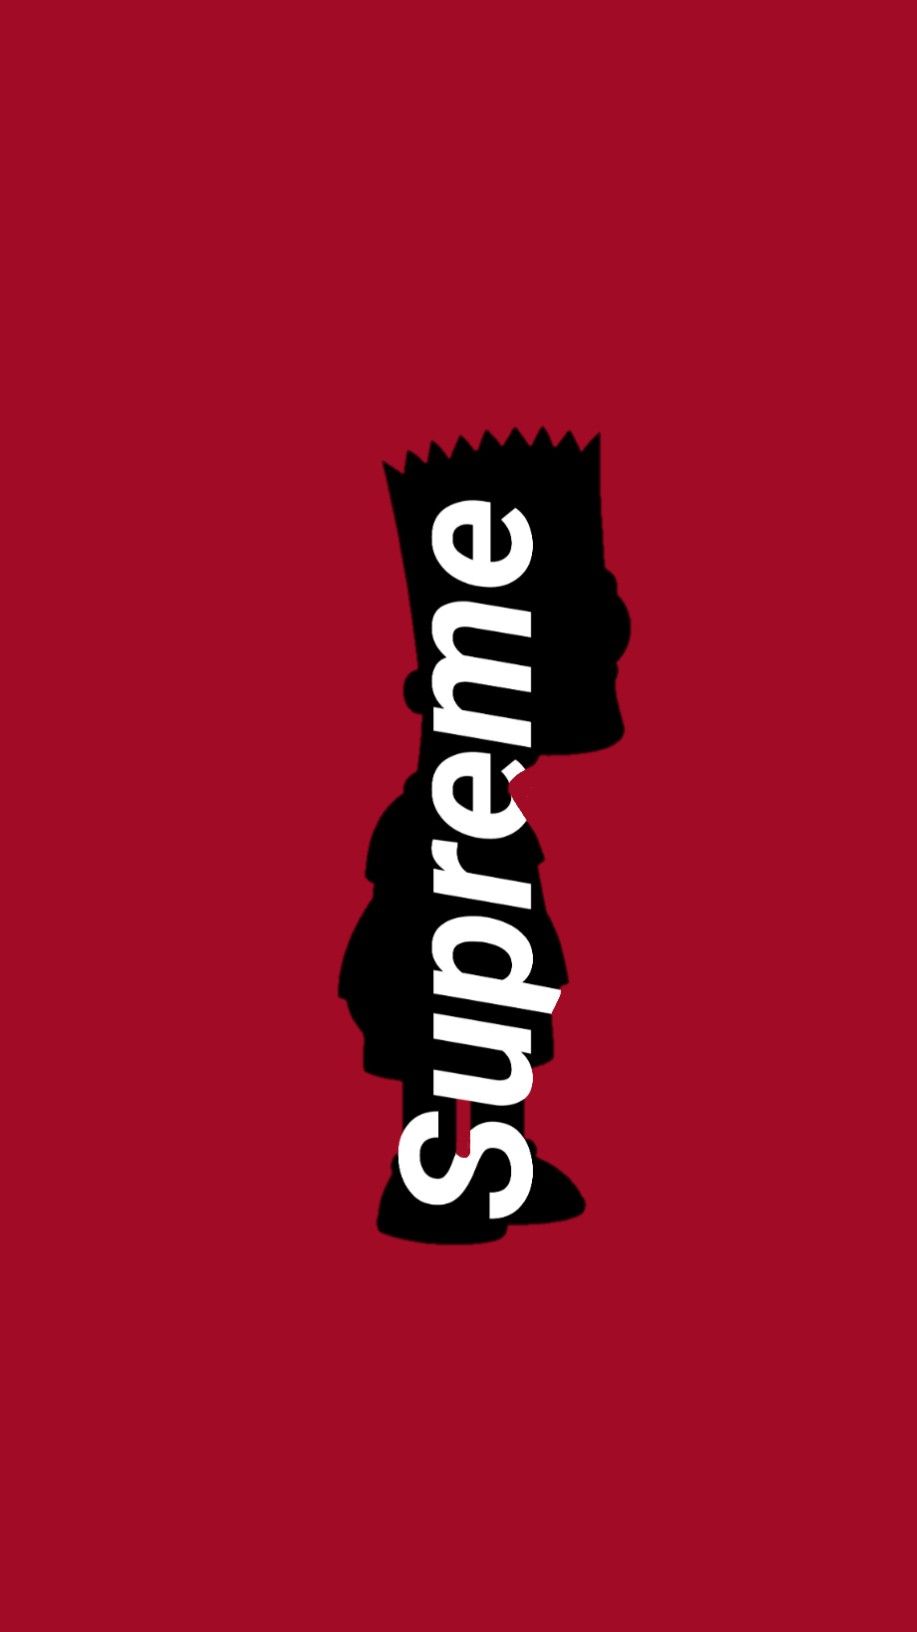 39] Simpsons iPhone Wallpaper Supreme on